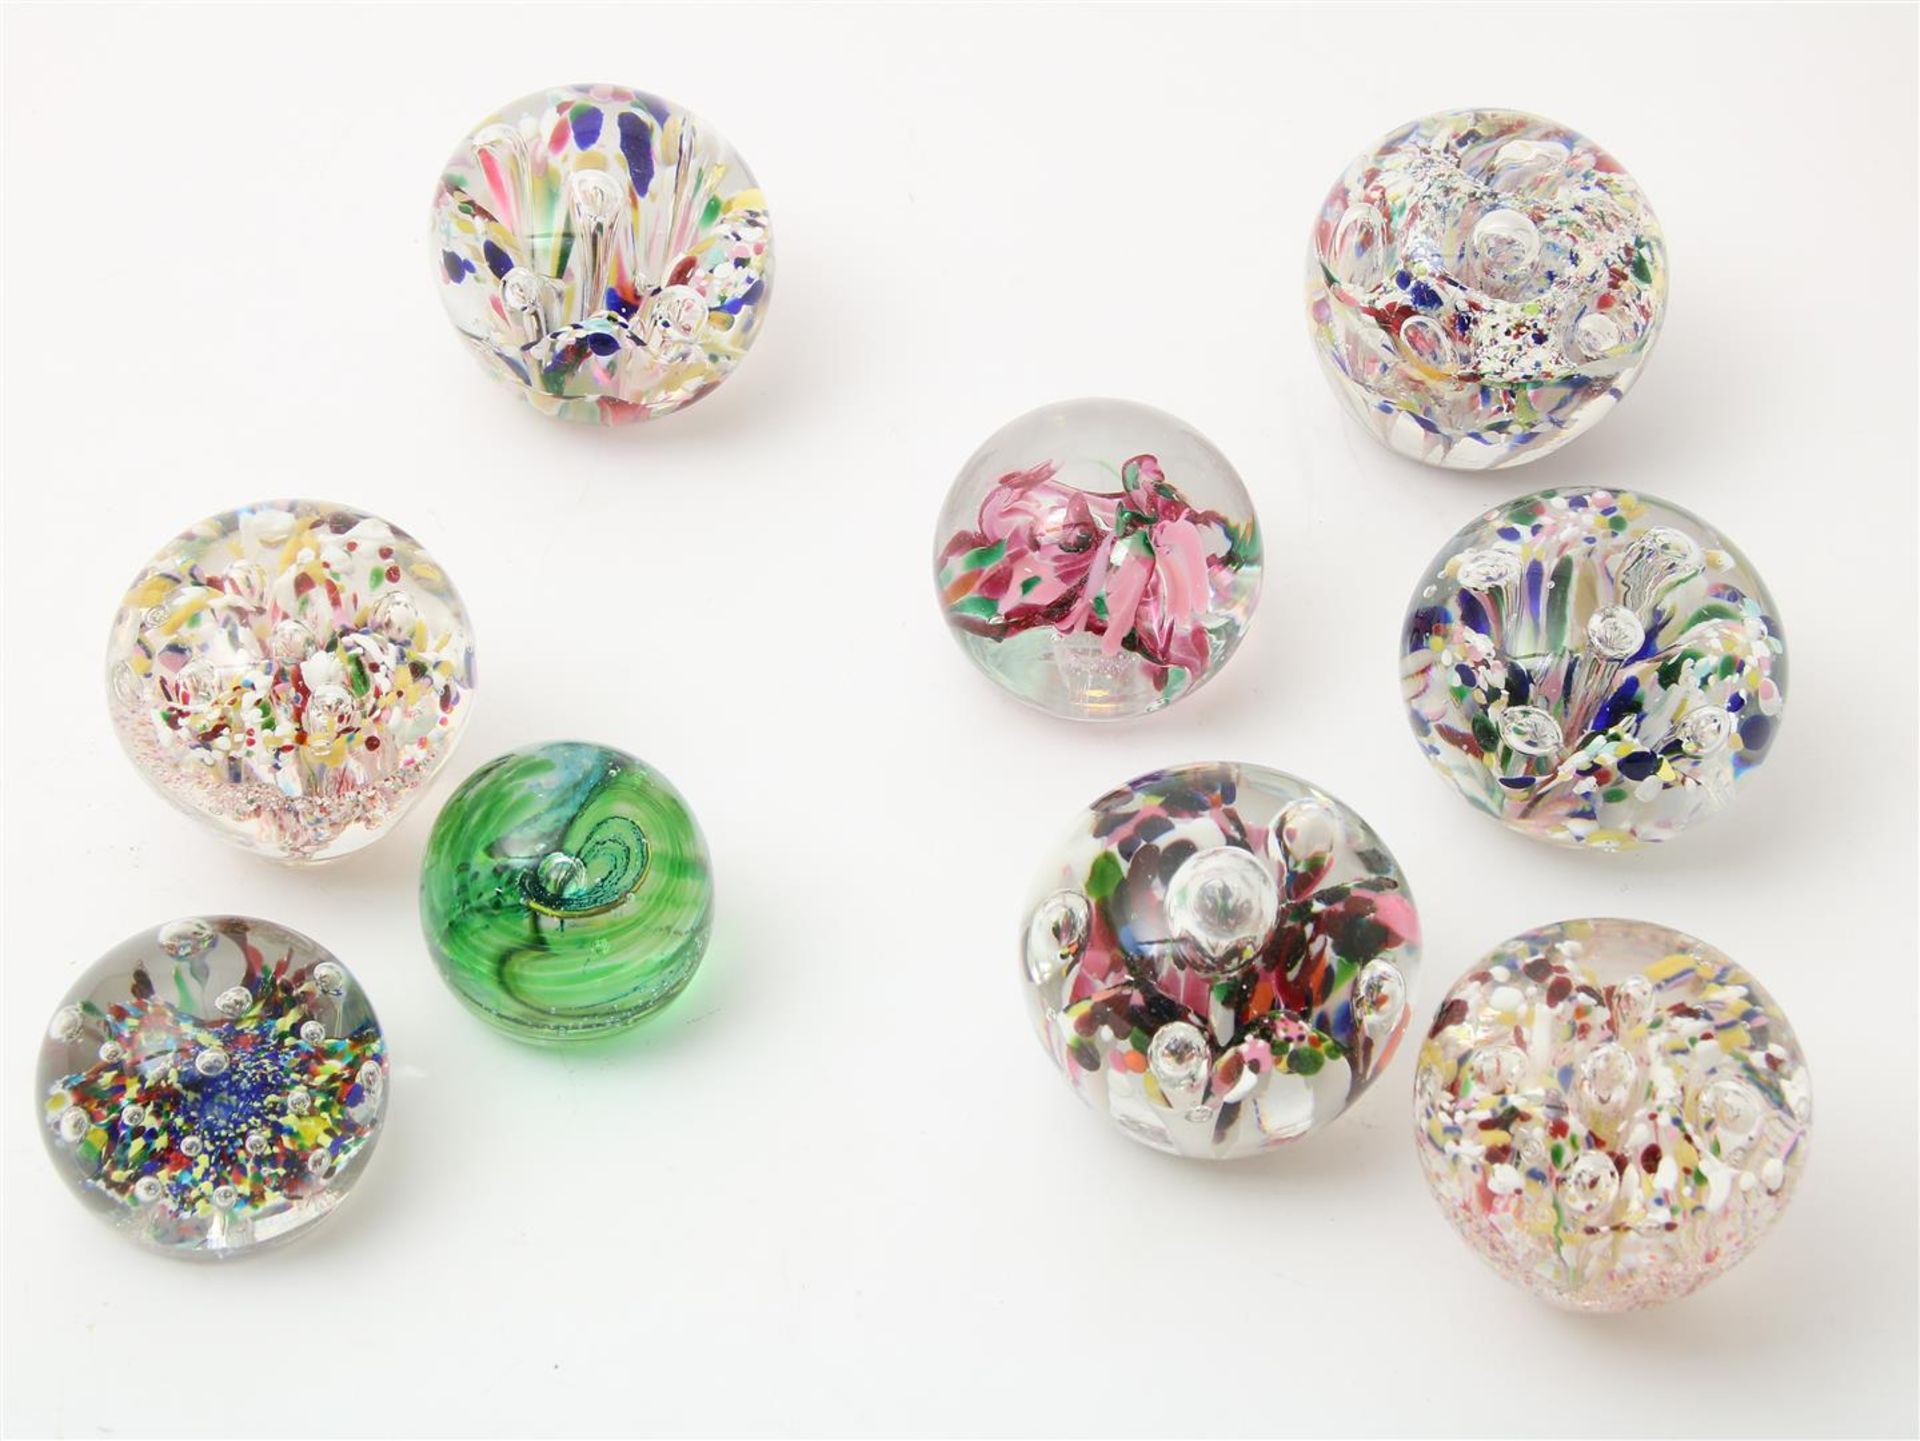 Series of 9 thick glass paperweights, with enclosed flower and ball decor, decors, probably Murano